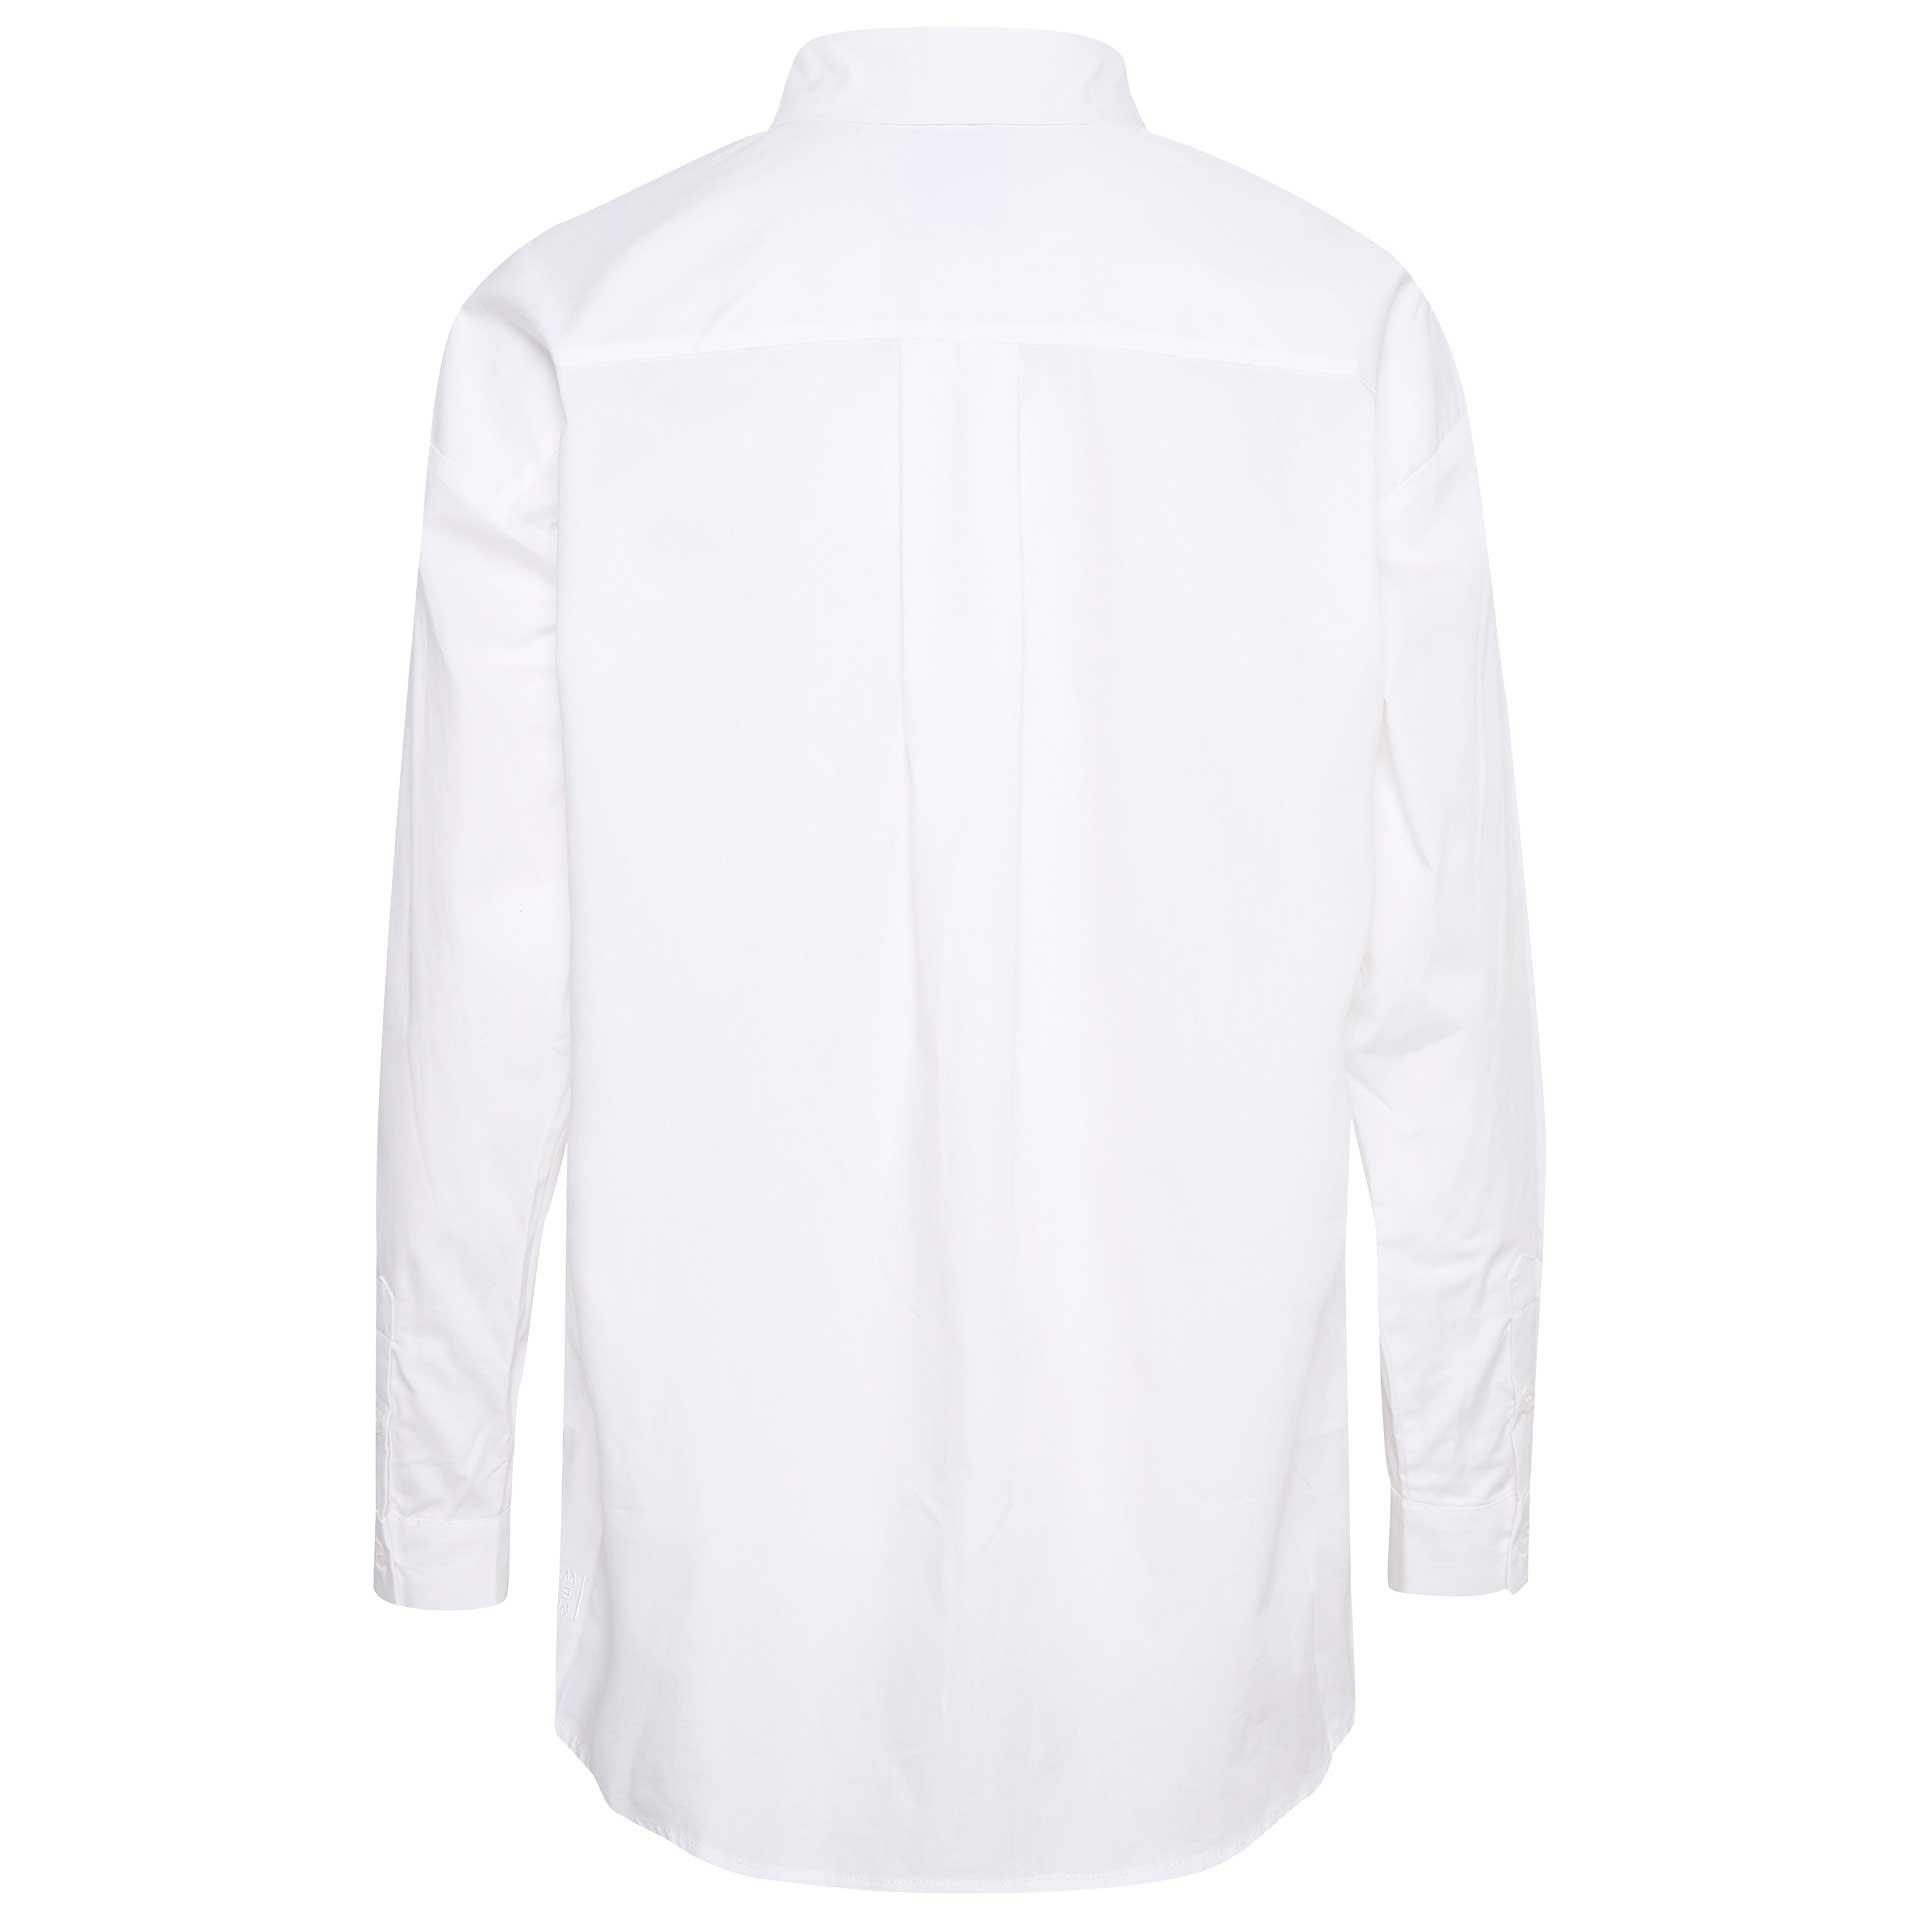 My Essential Wardrobe Blouse The Shirt 2